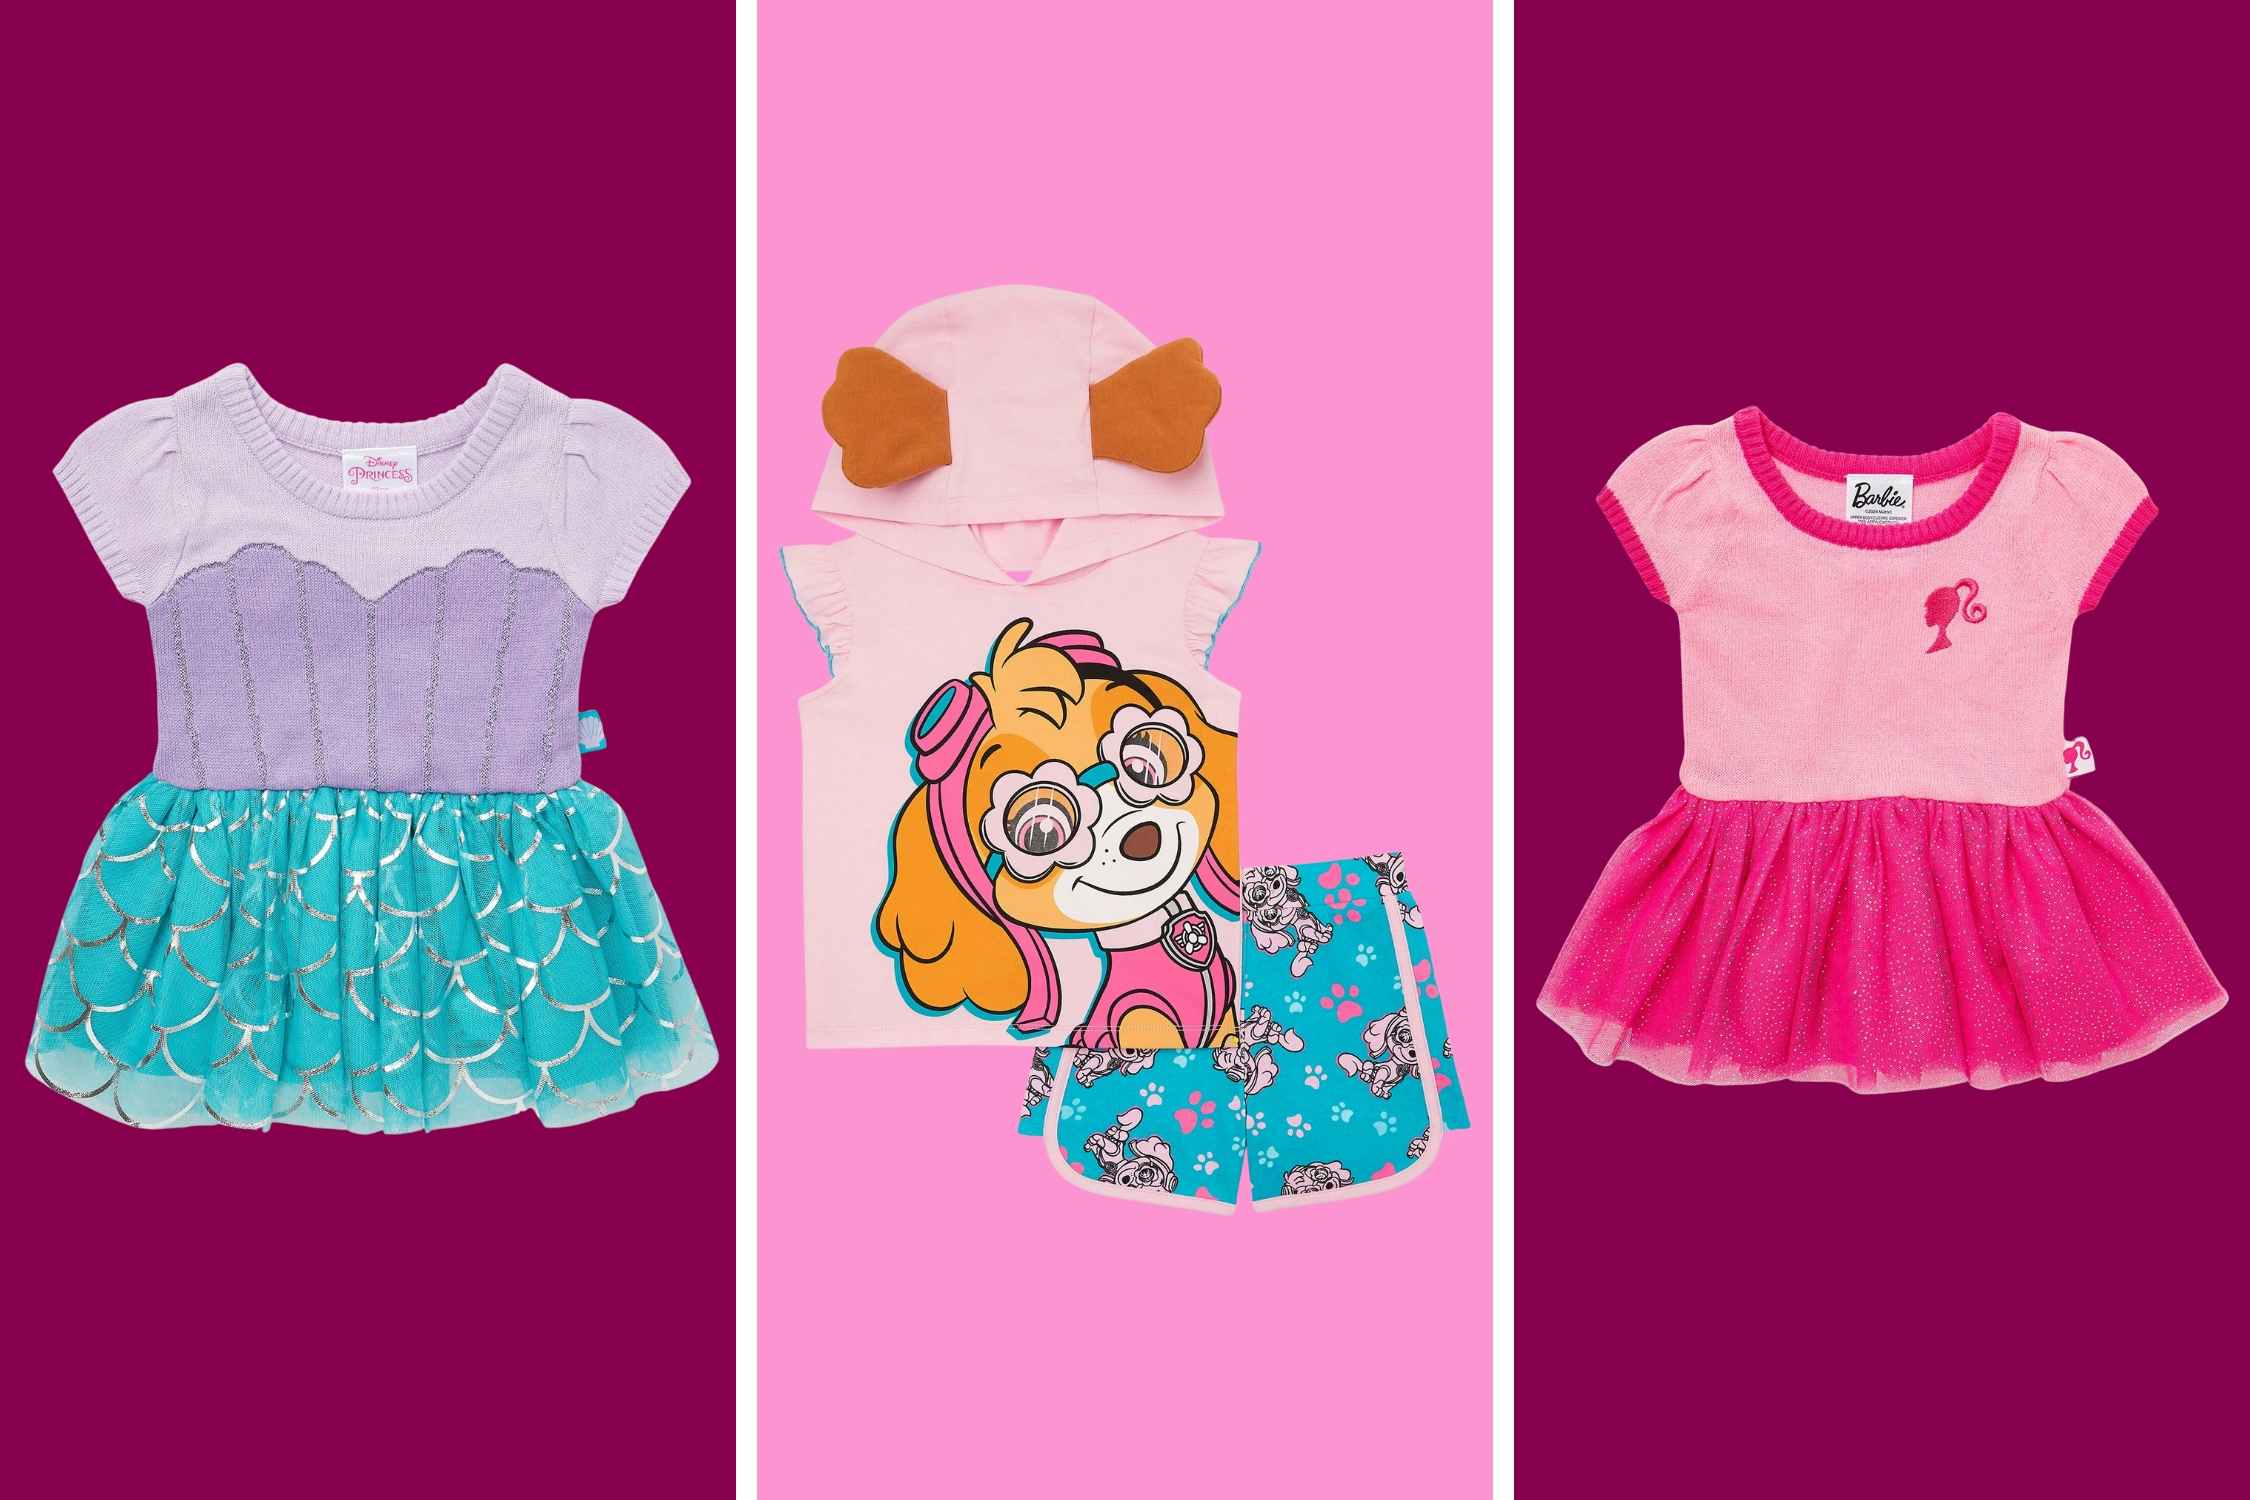 Baby and Toddler Clothing at Walmart: Disney, Barbie, and More